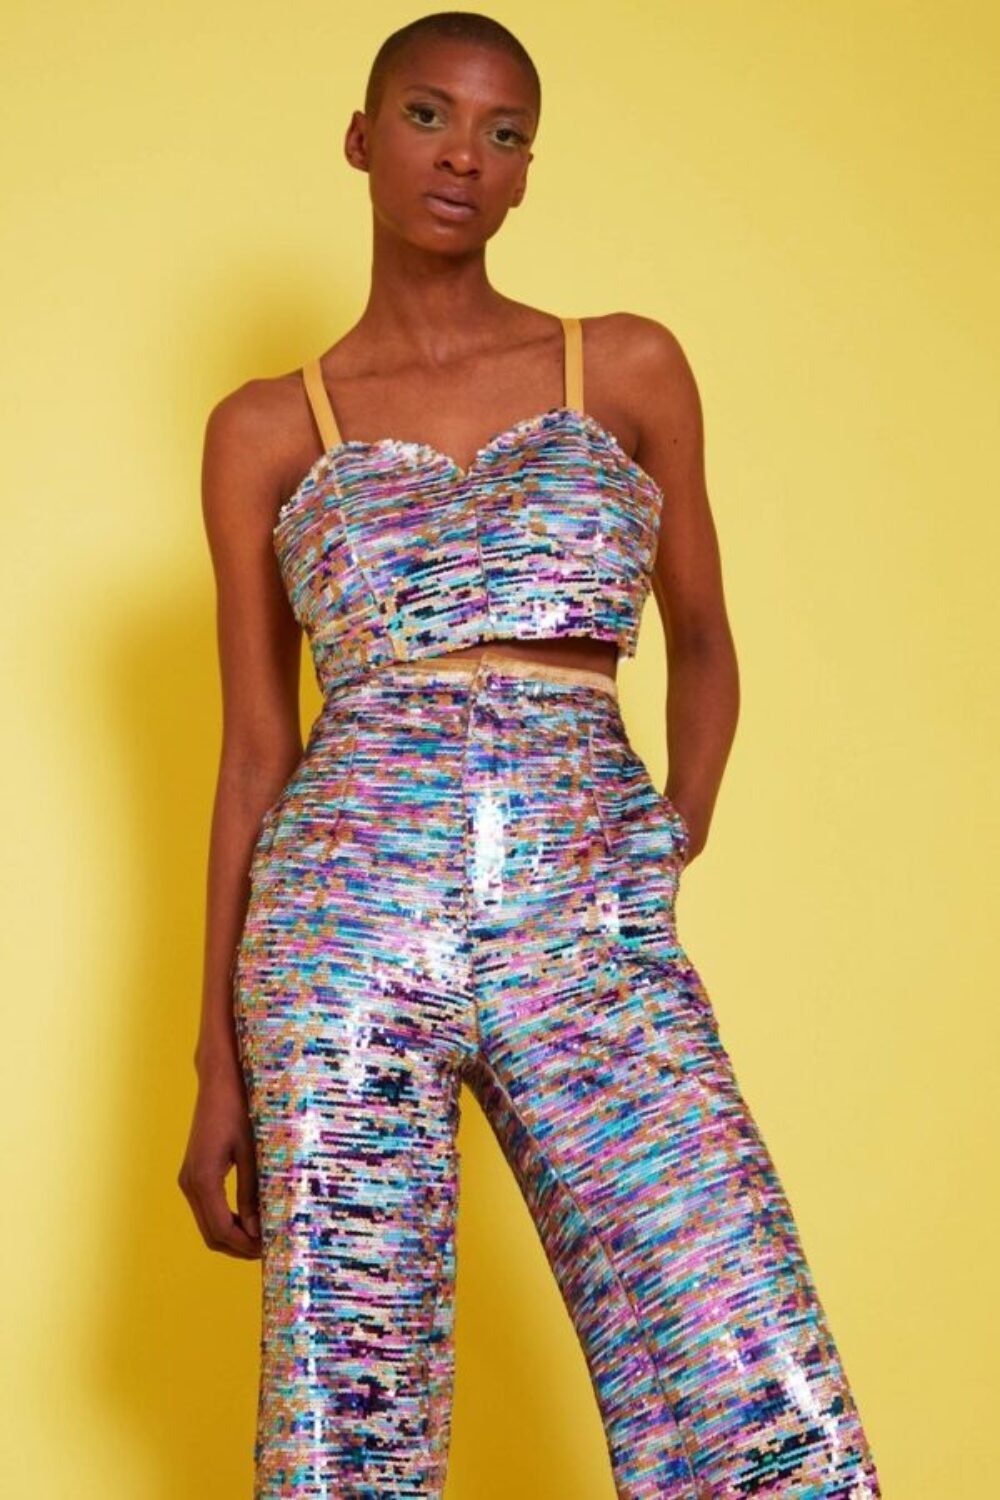 Shop Lux Multi-Coloured Geometric Sequin Crop Top and women's luxury and designer clothes at www.lux-apparel.co.uk